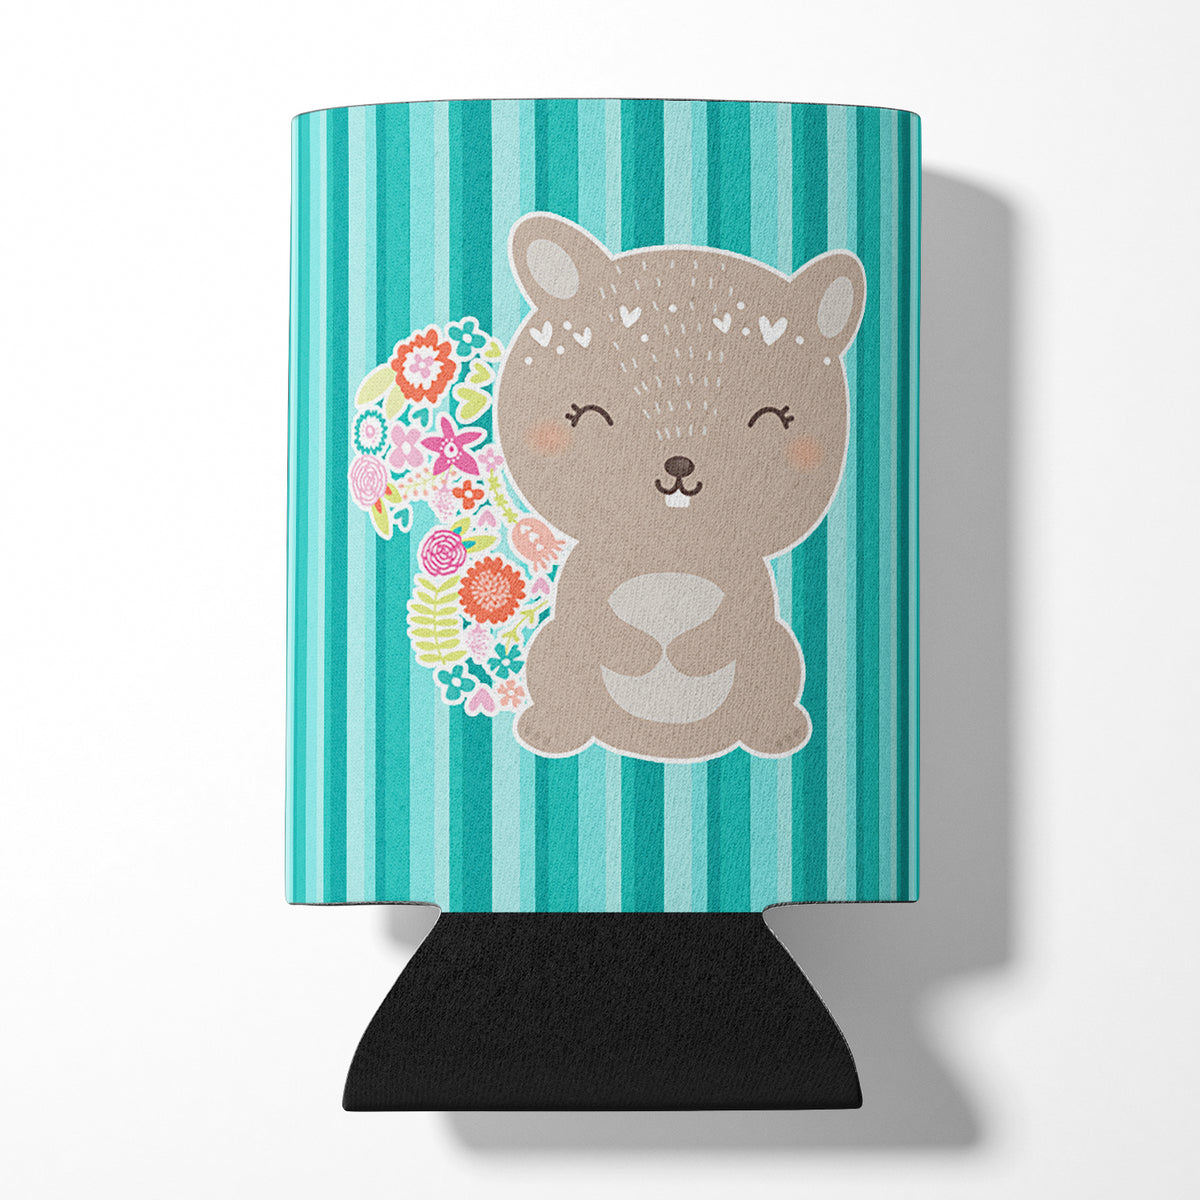 Flowered Squirrel Can or Bottle Hugger BB6936CC